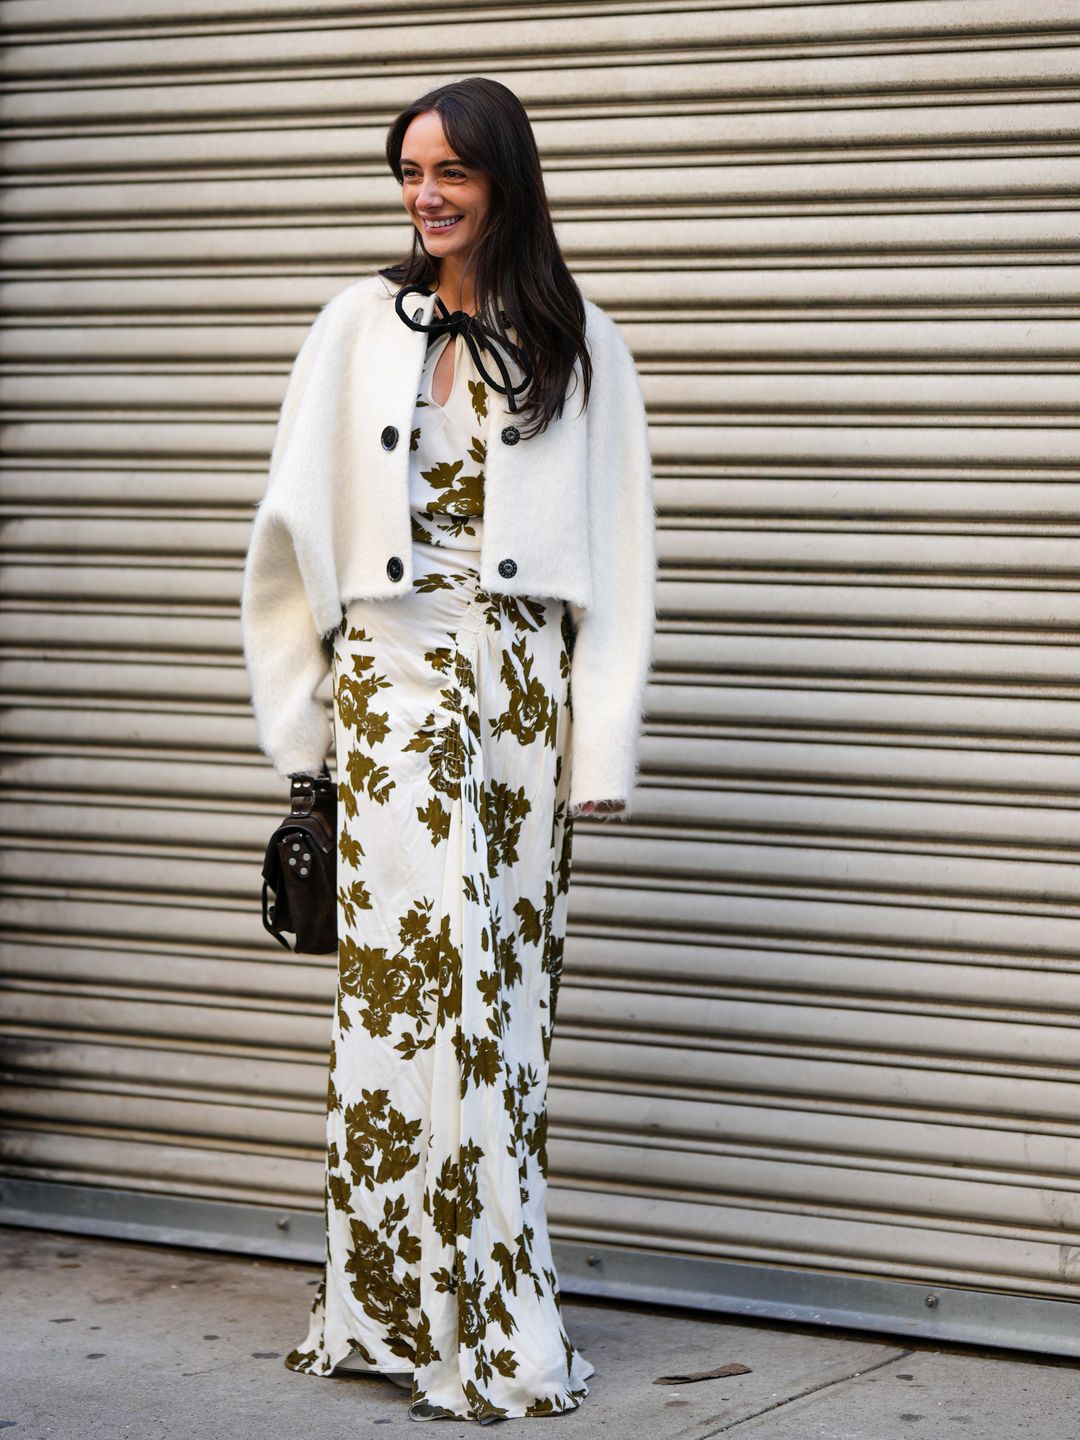 NYFW guest wearing white jacket with flowy printed maxi 